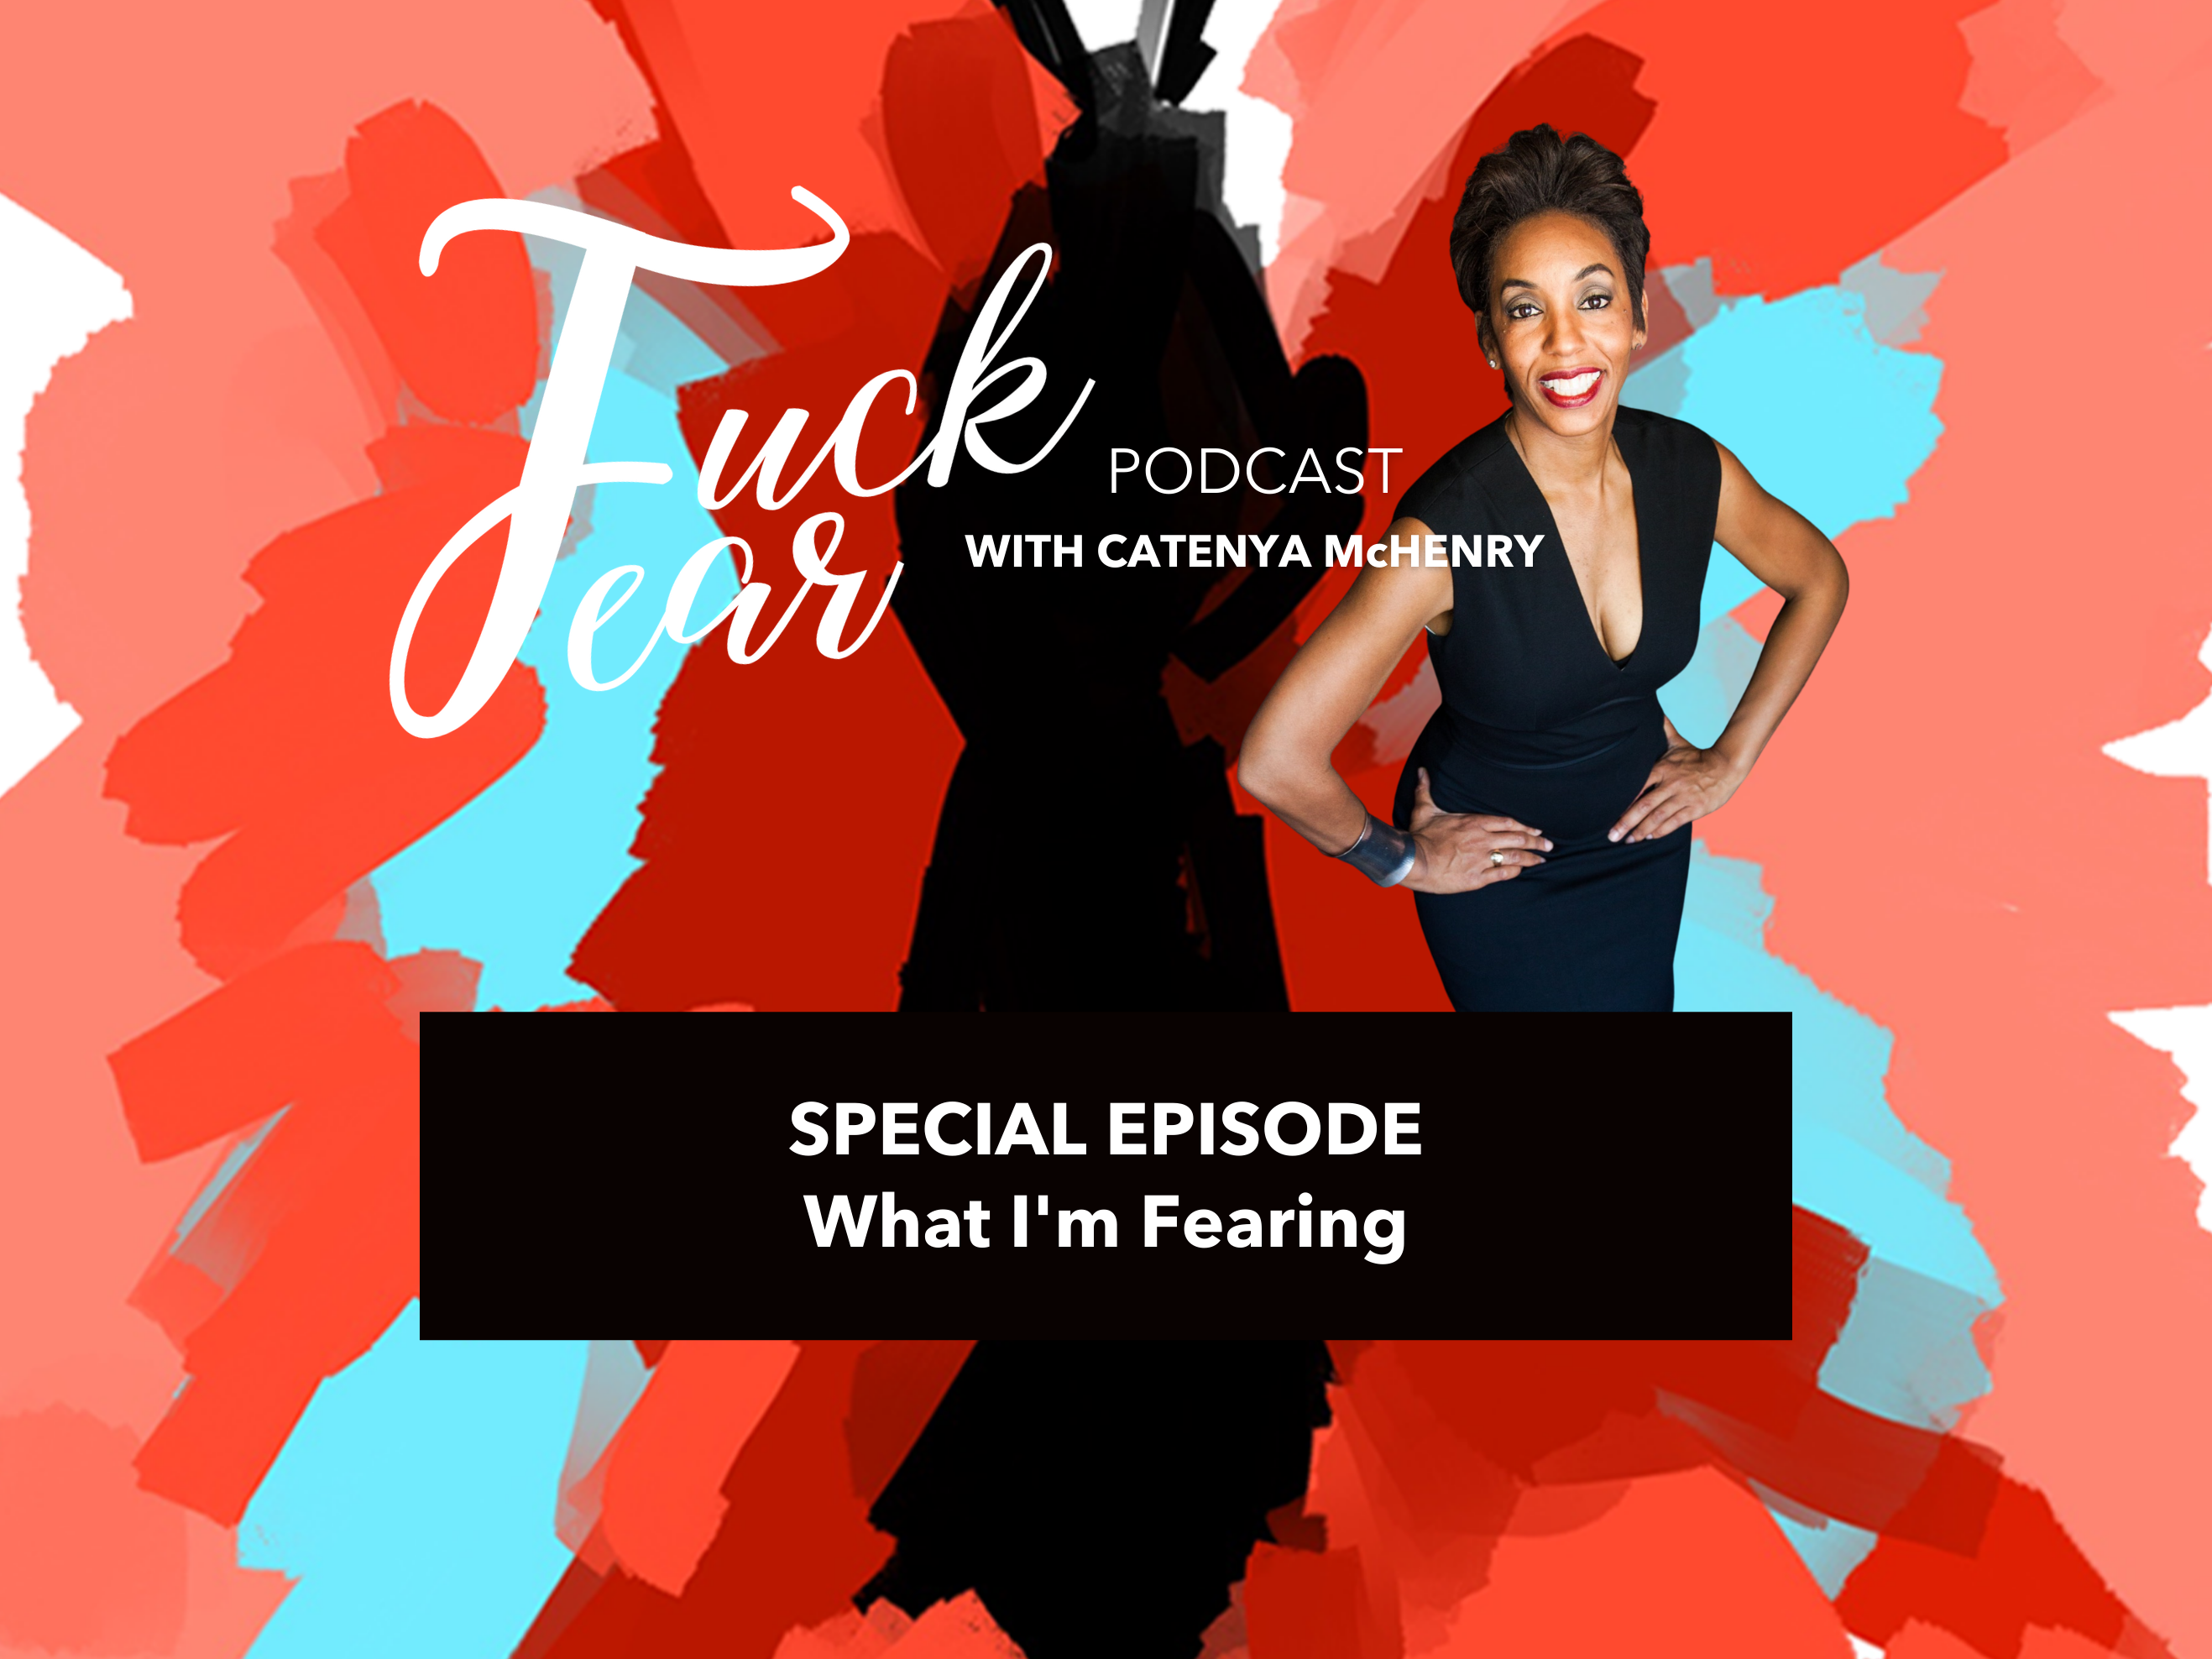 Fuck Fear Podcast with host Catenya McHenry special episode about what she's afraid of